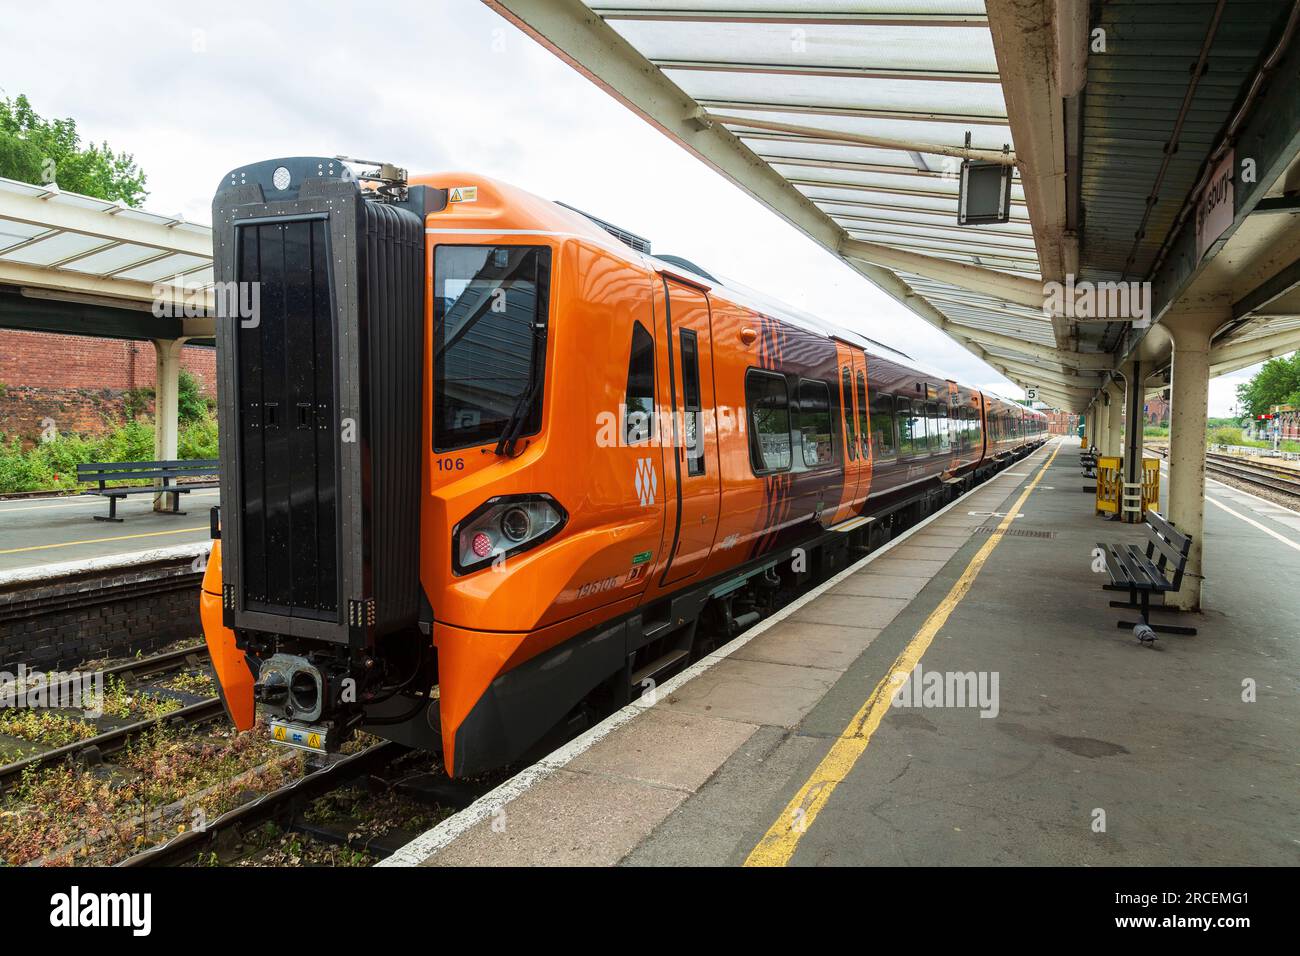 Class 196 train operated by West Midlands Railway (WMT) at Shrewsbury Station. Stock Photo